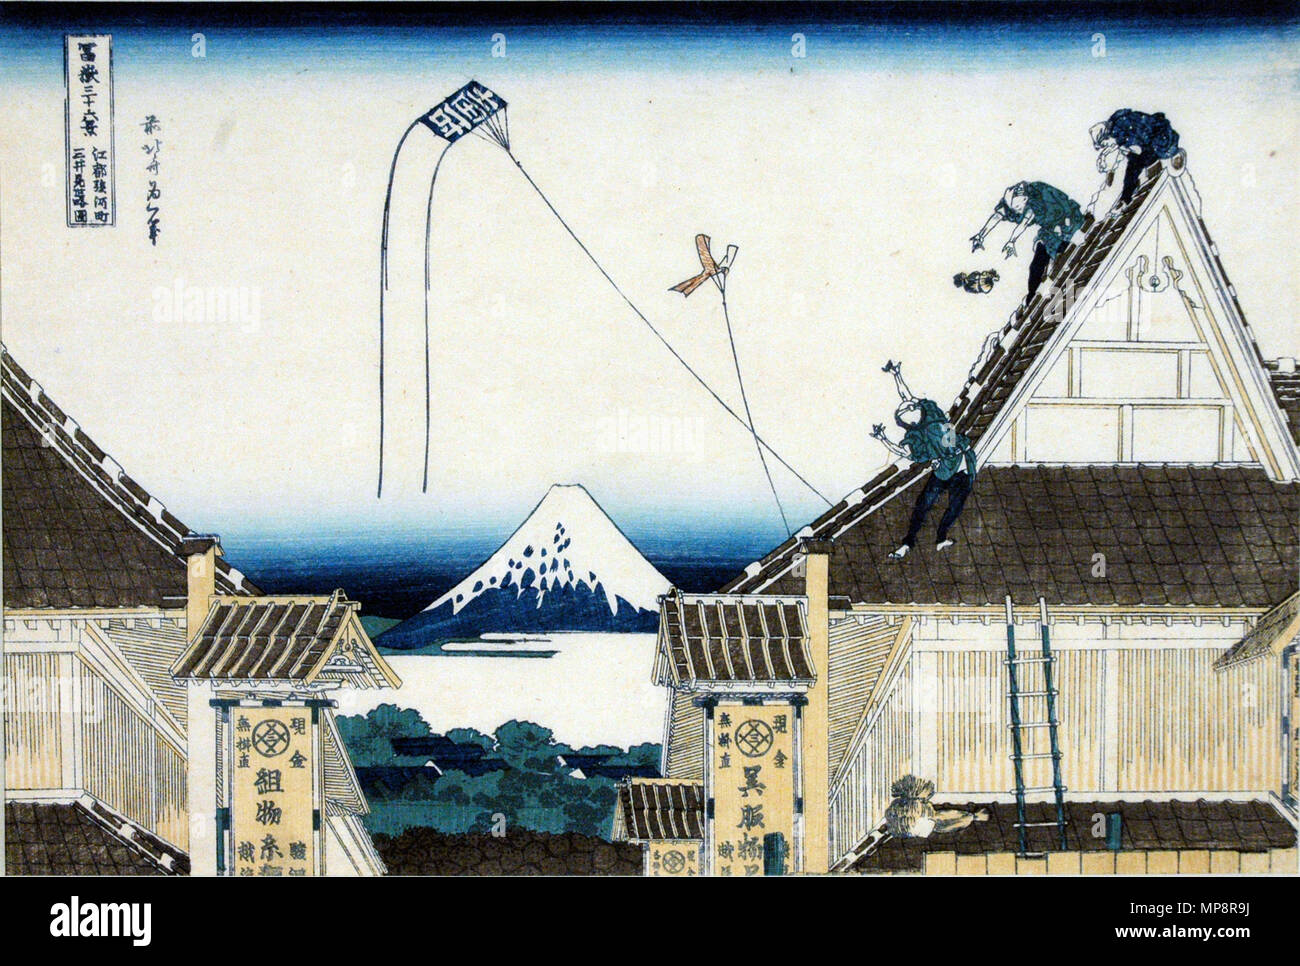 . English: Accession Number: 1957.186 Display Artist: Katsushika Hokusai Display Title: Mitsui Store at Surugacho in Edo Series Title: Thirty-six Views of Mount Fuji Suite Name: Fugaku sanjurokkei Creation Date: ca. 1831-1834 Height: 10 3/8 in. Width: 15 5/16 in. Display Dimensions: 10 3/8 in. x 15 5/16 in. (26.35 cm x 38.89 cm) Publisher: Nishimuraya Yohachi Credit Line: Bequest of Mrs. Cora Timken Burnett Label Copy: 'Japanese buyers of prints during the 1870s to 1890s preferred works that showcased foreigners, modern innovations, and dramatic heroic tales using the bright, saturated synthet Stock Photo